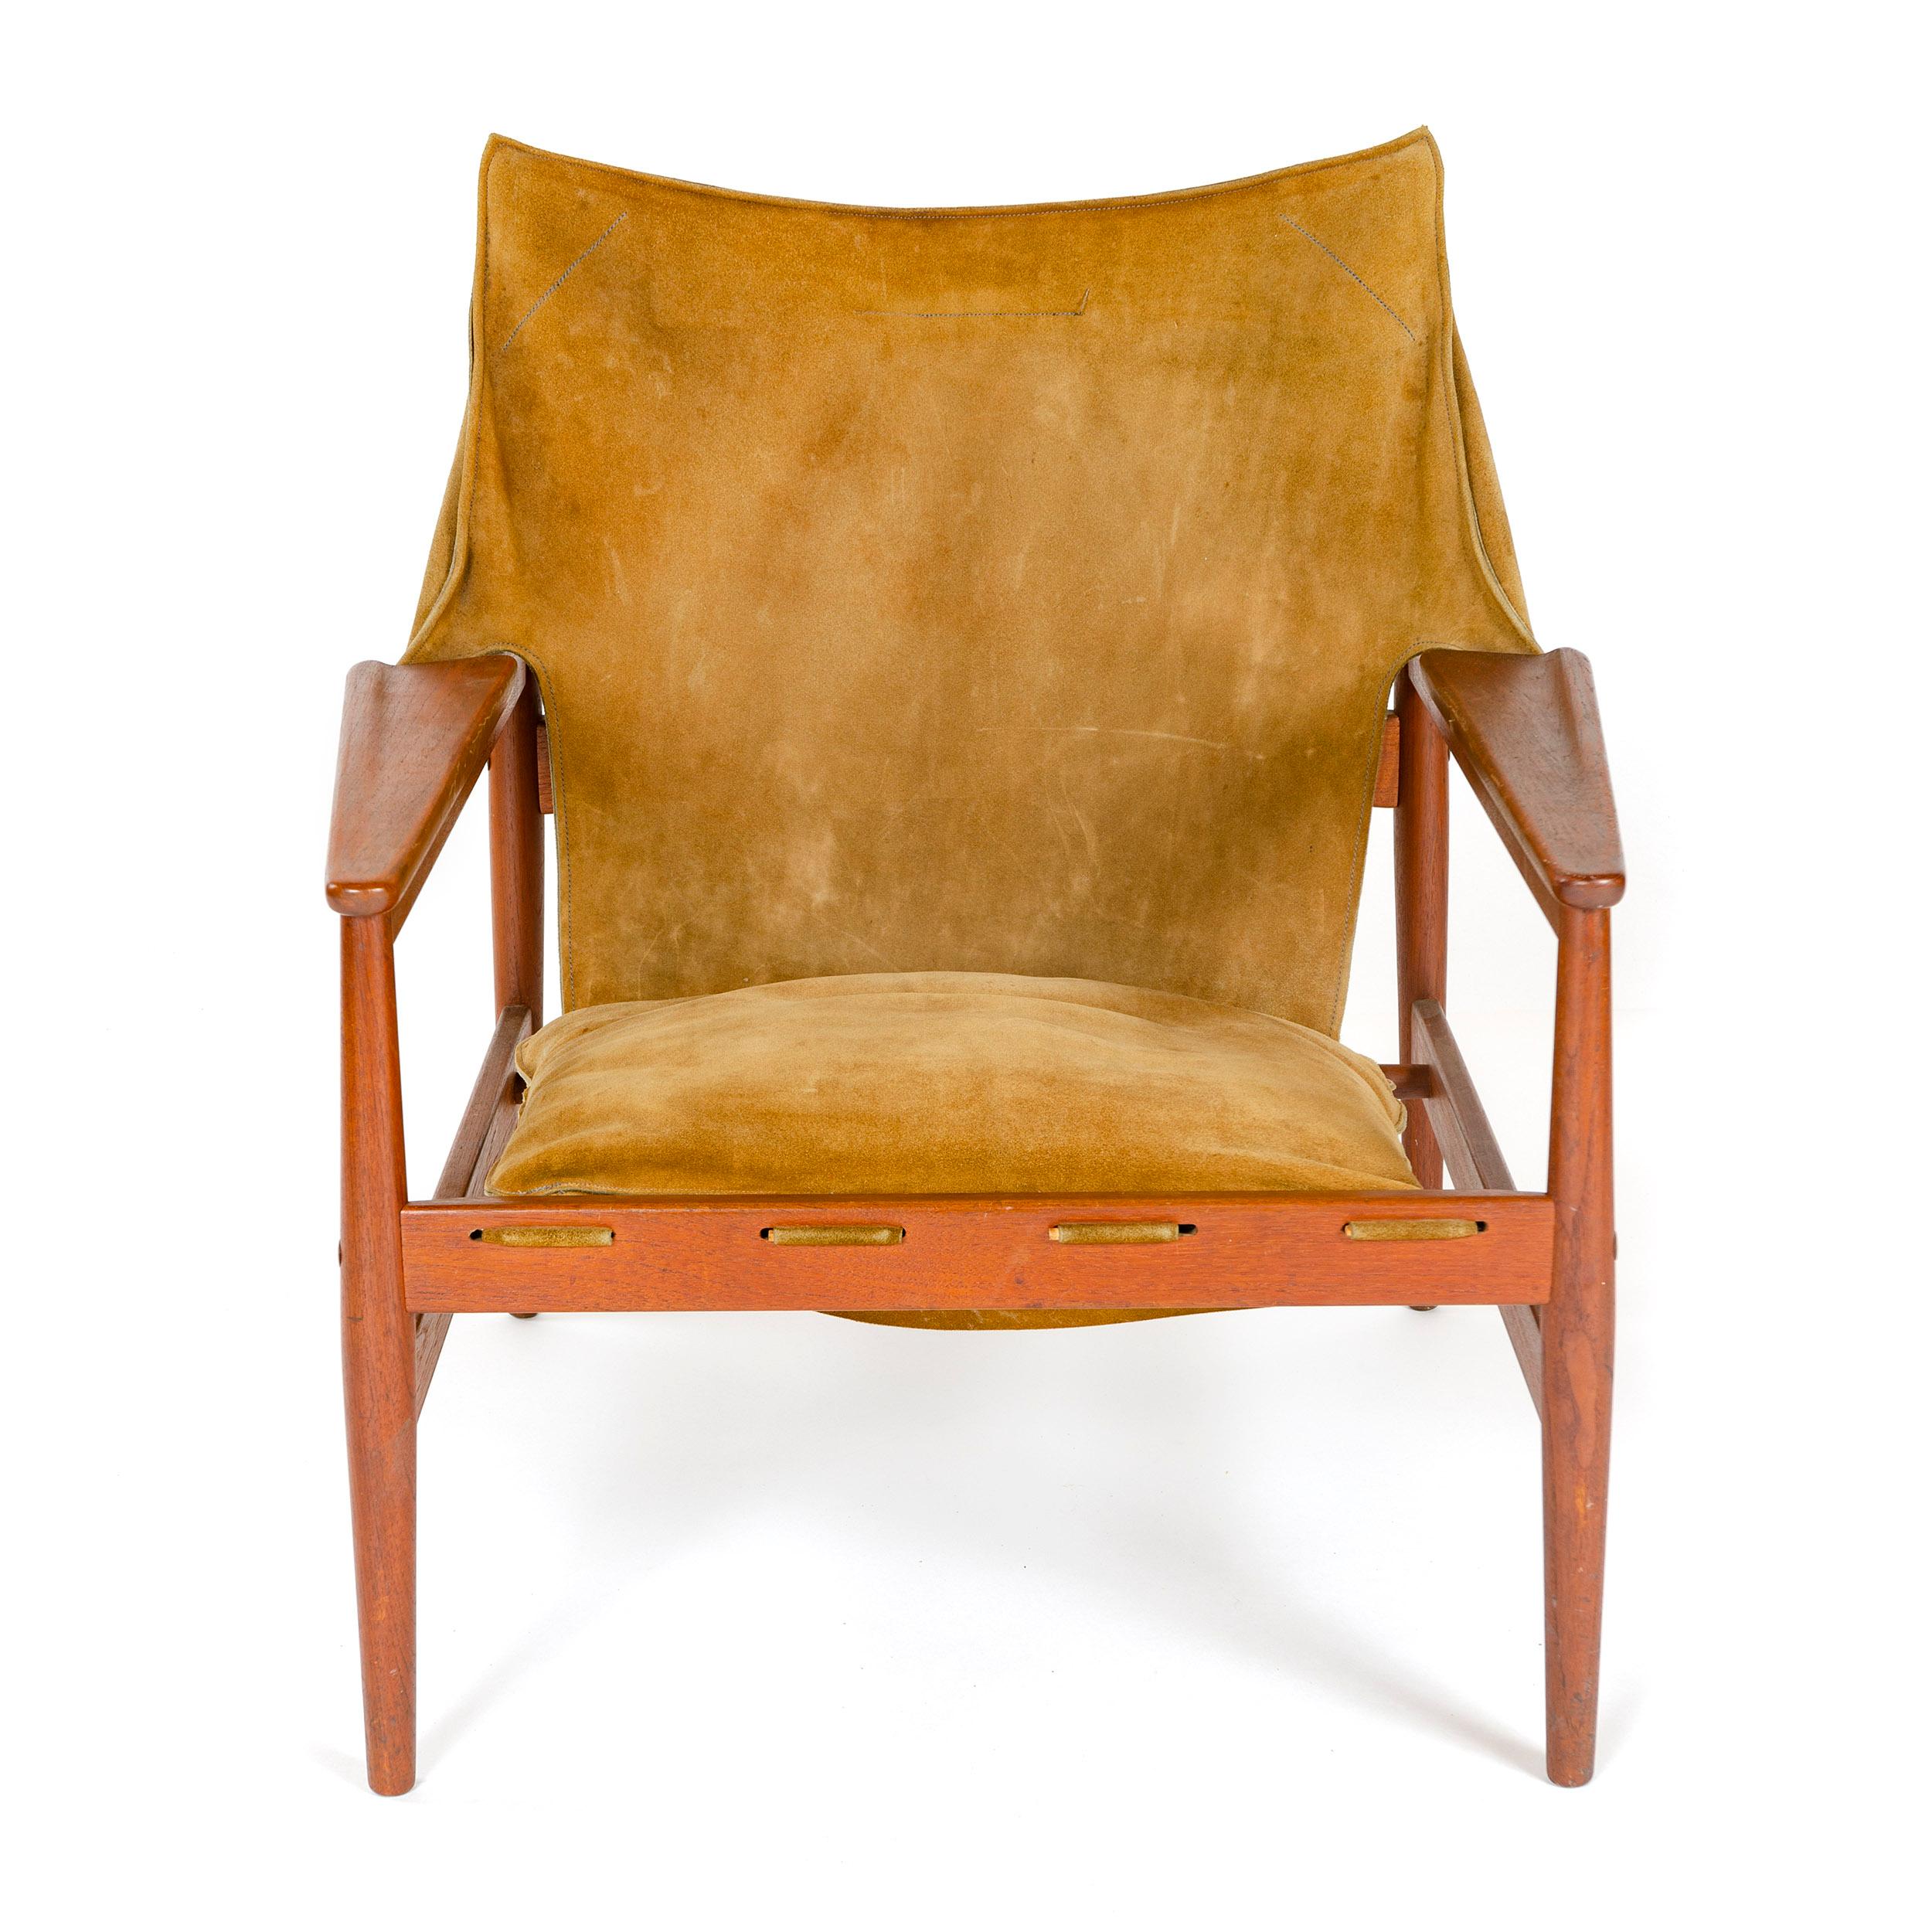 A lounge chair with leather upholstery on an exposed teak frame with buckle straps and a matching loose bottom cushion.